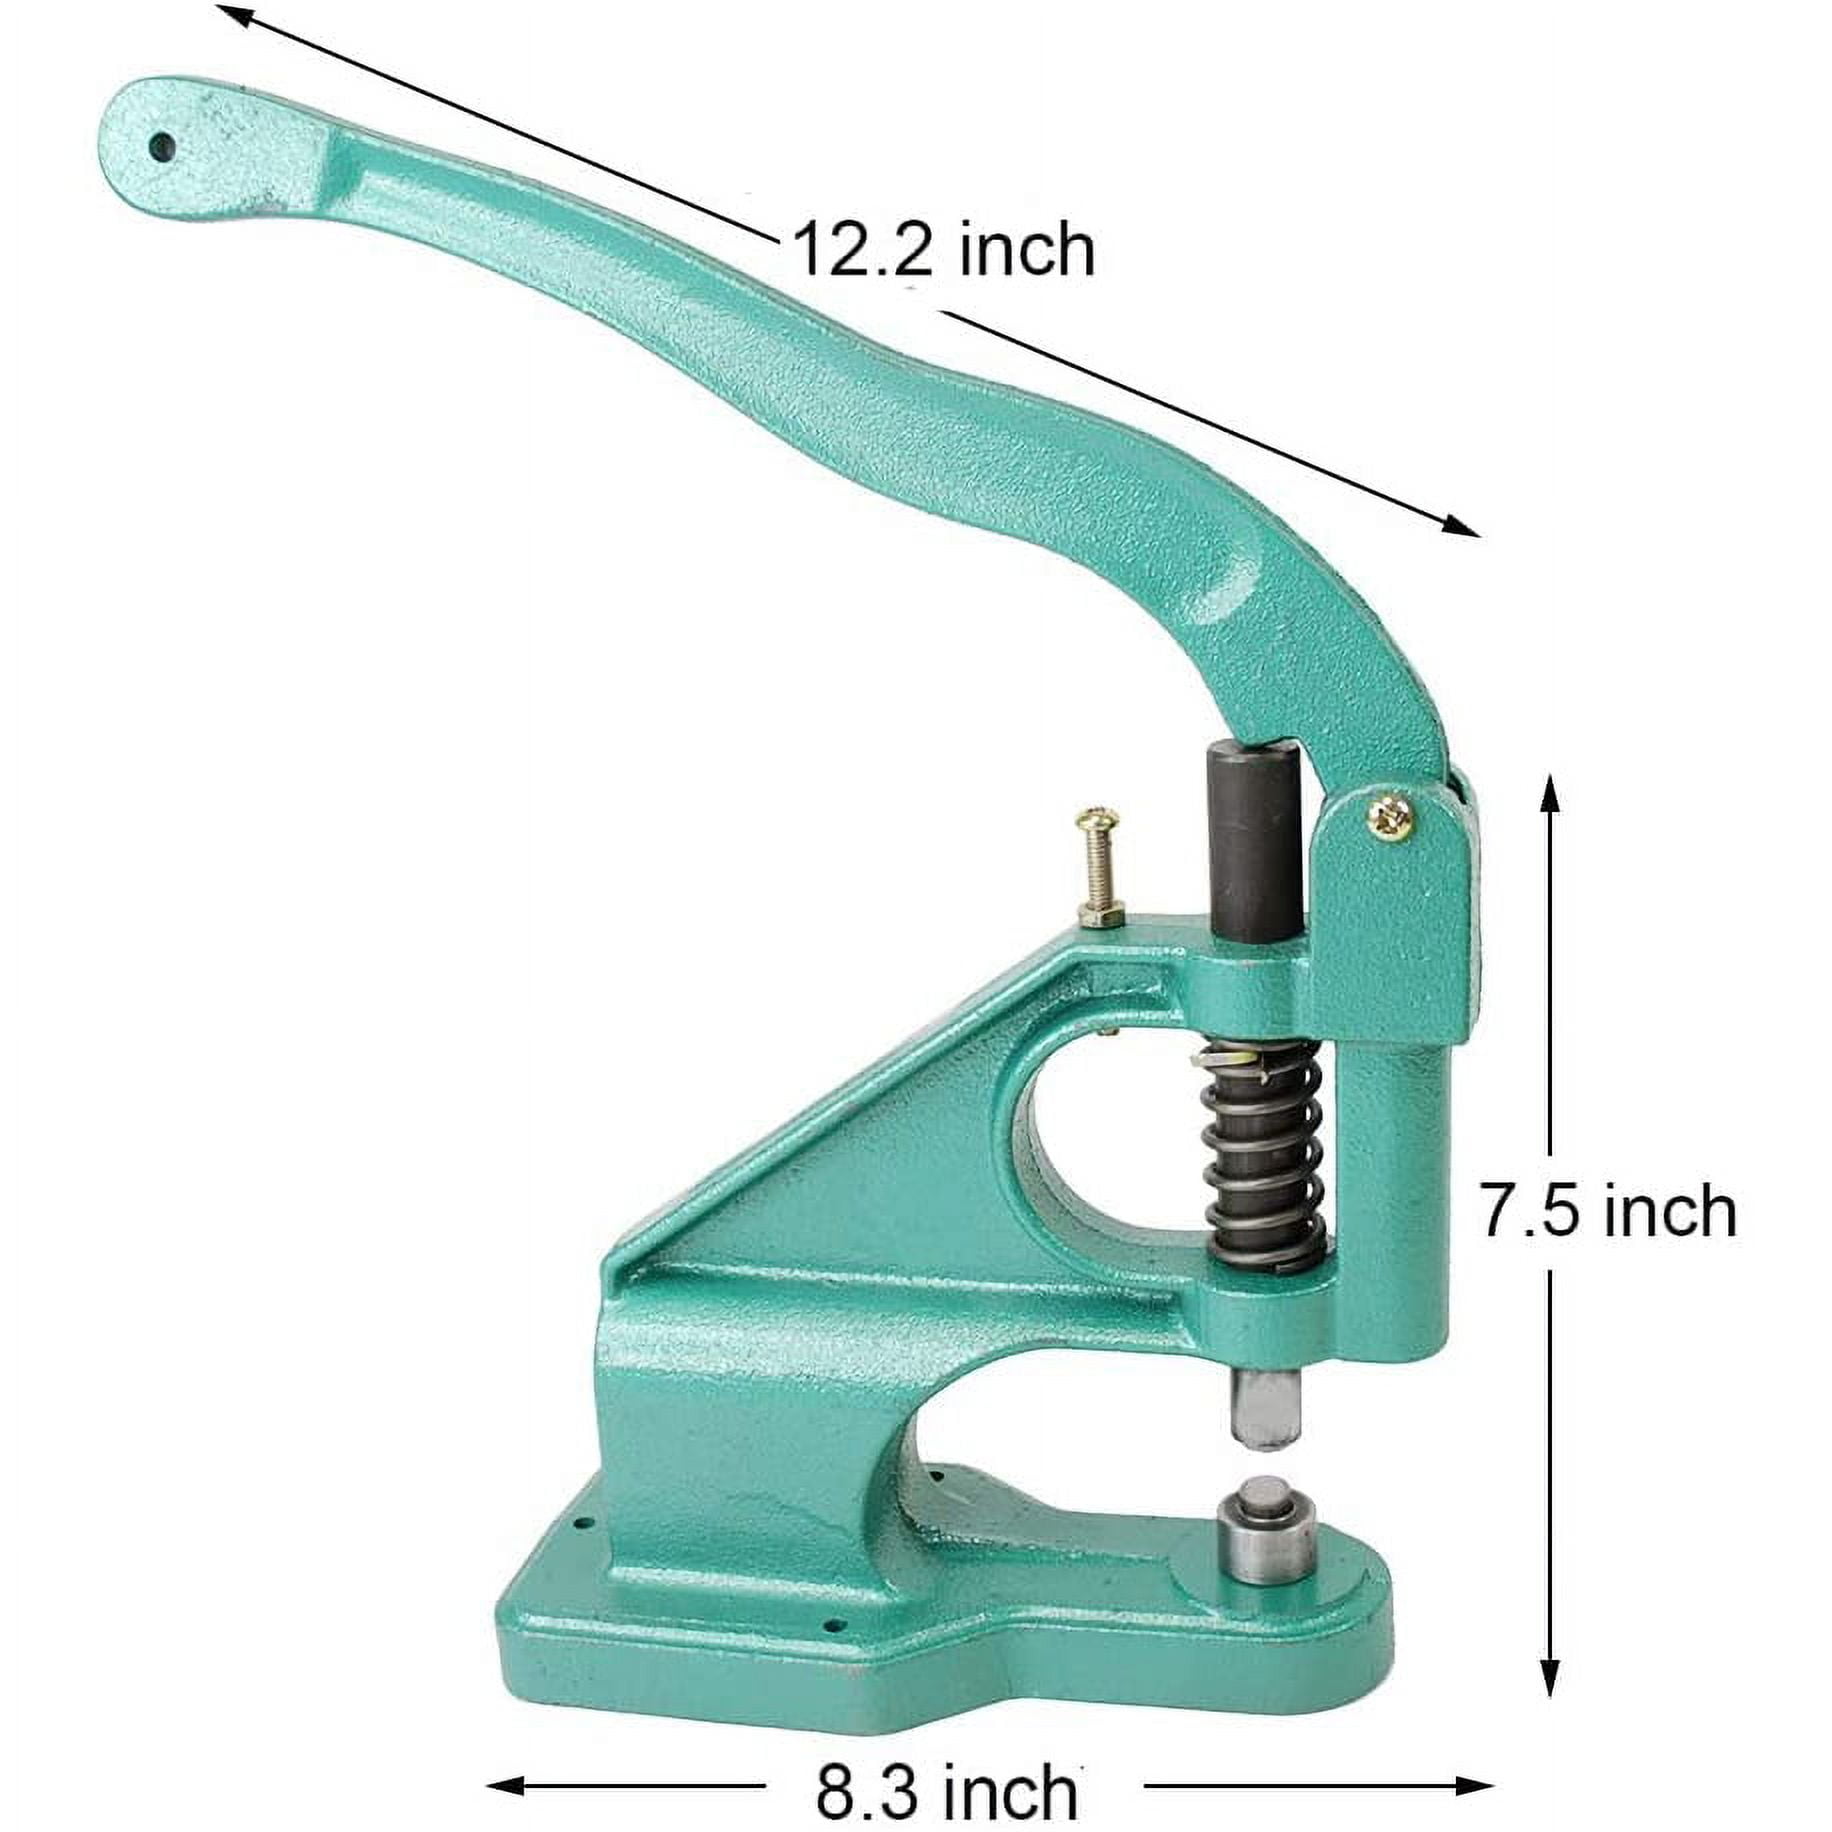 Heavy Duty Grommet Press Machine Set W/Punch Hole Tool, Hand Press Eyelet  Grommet Punch Tool, 2400pcs Grommets for Curtains Scrapbooking Flags Belts